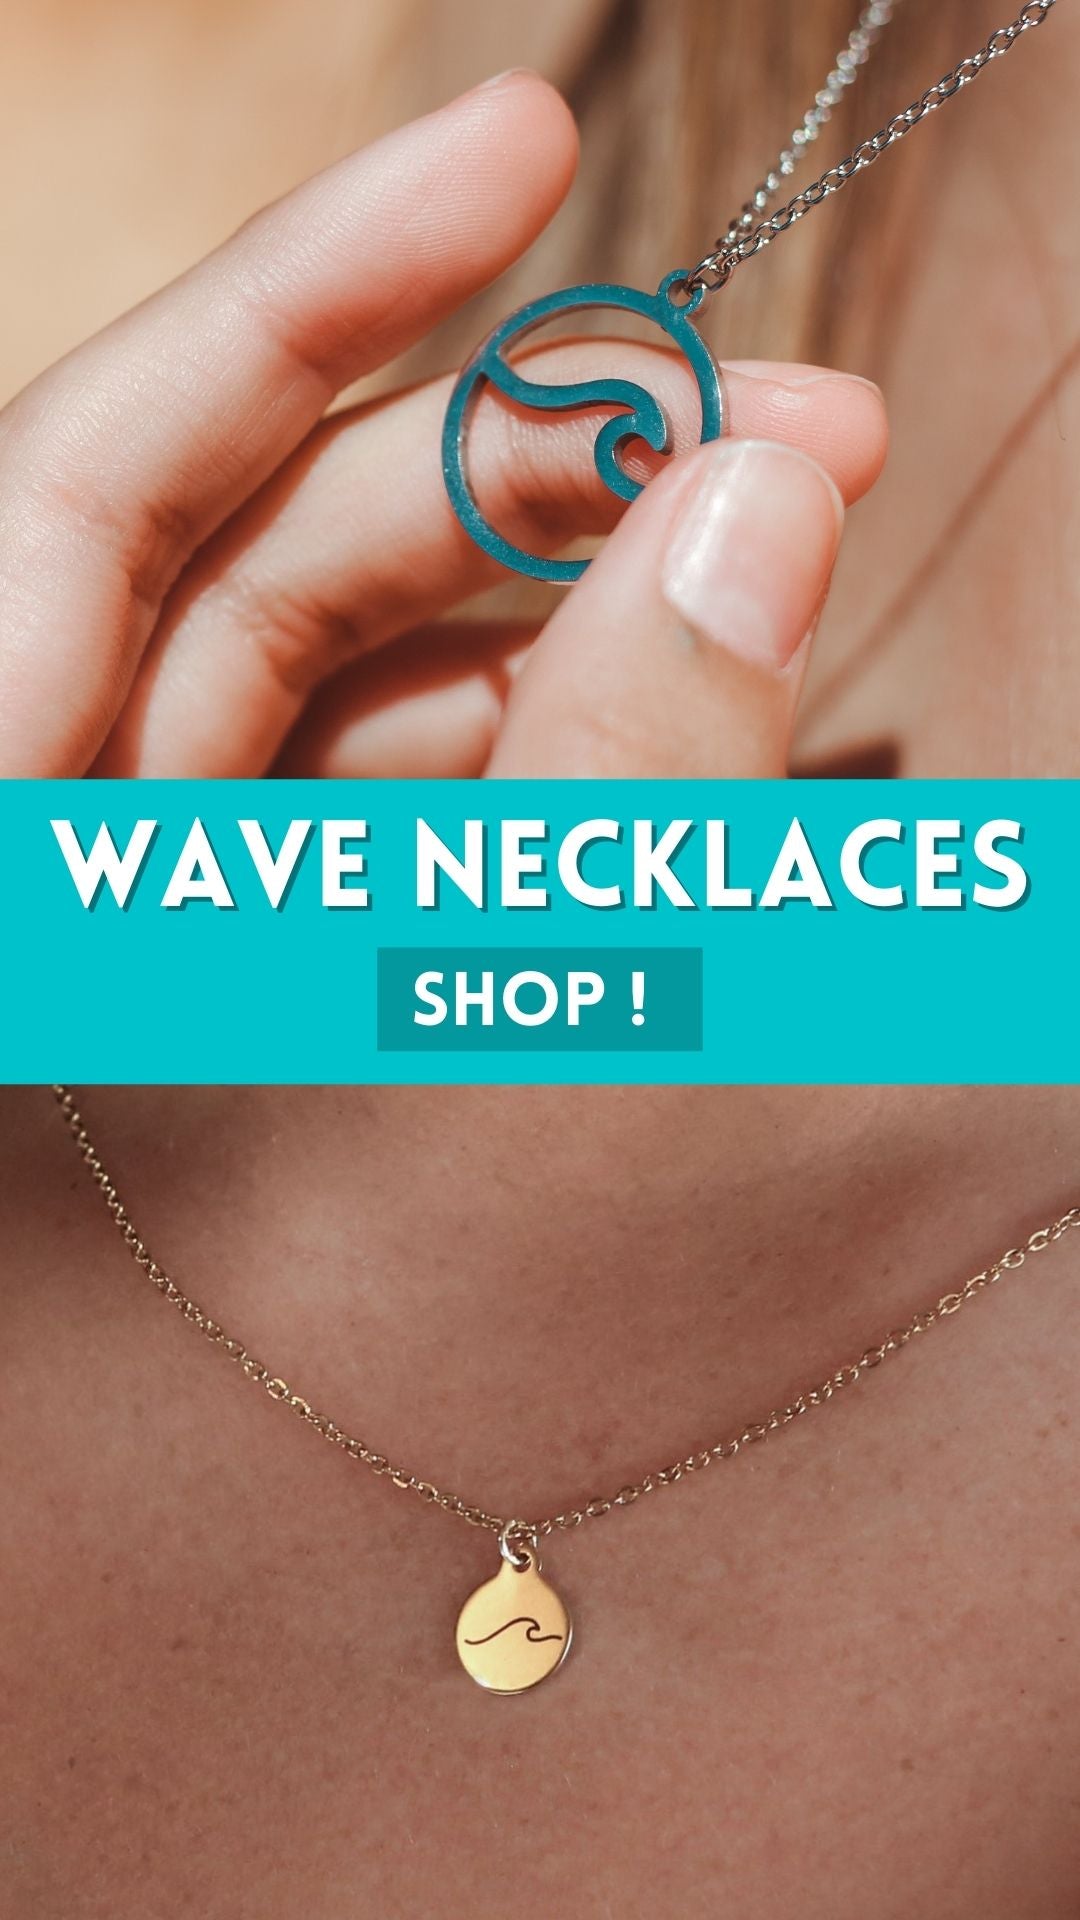 Wave necklace meaning